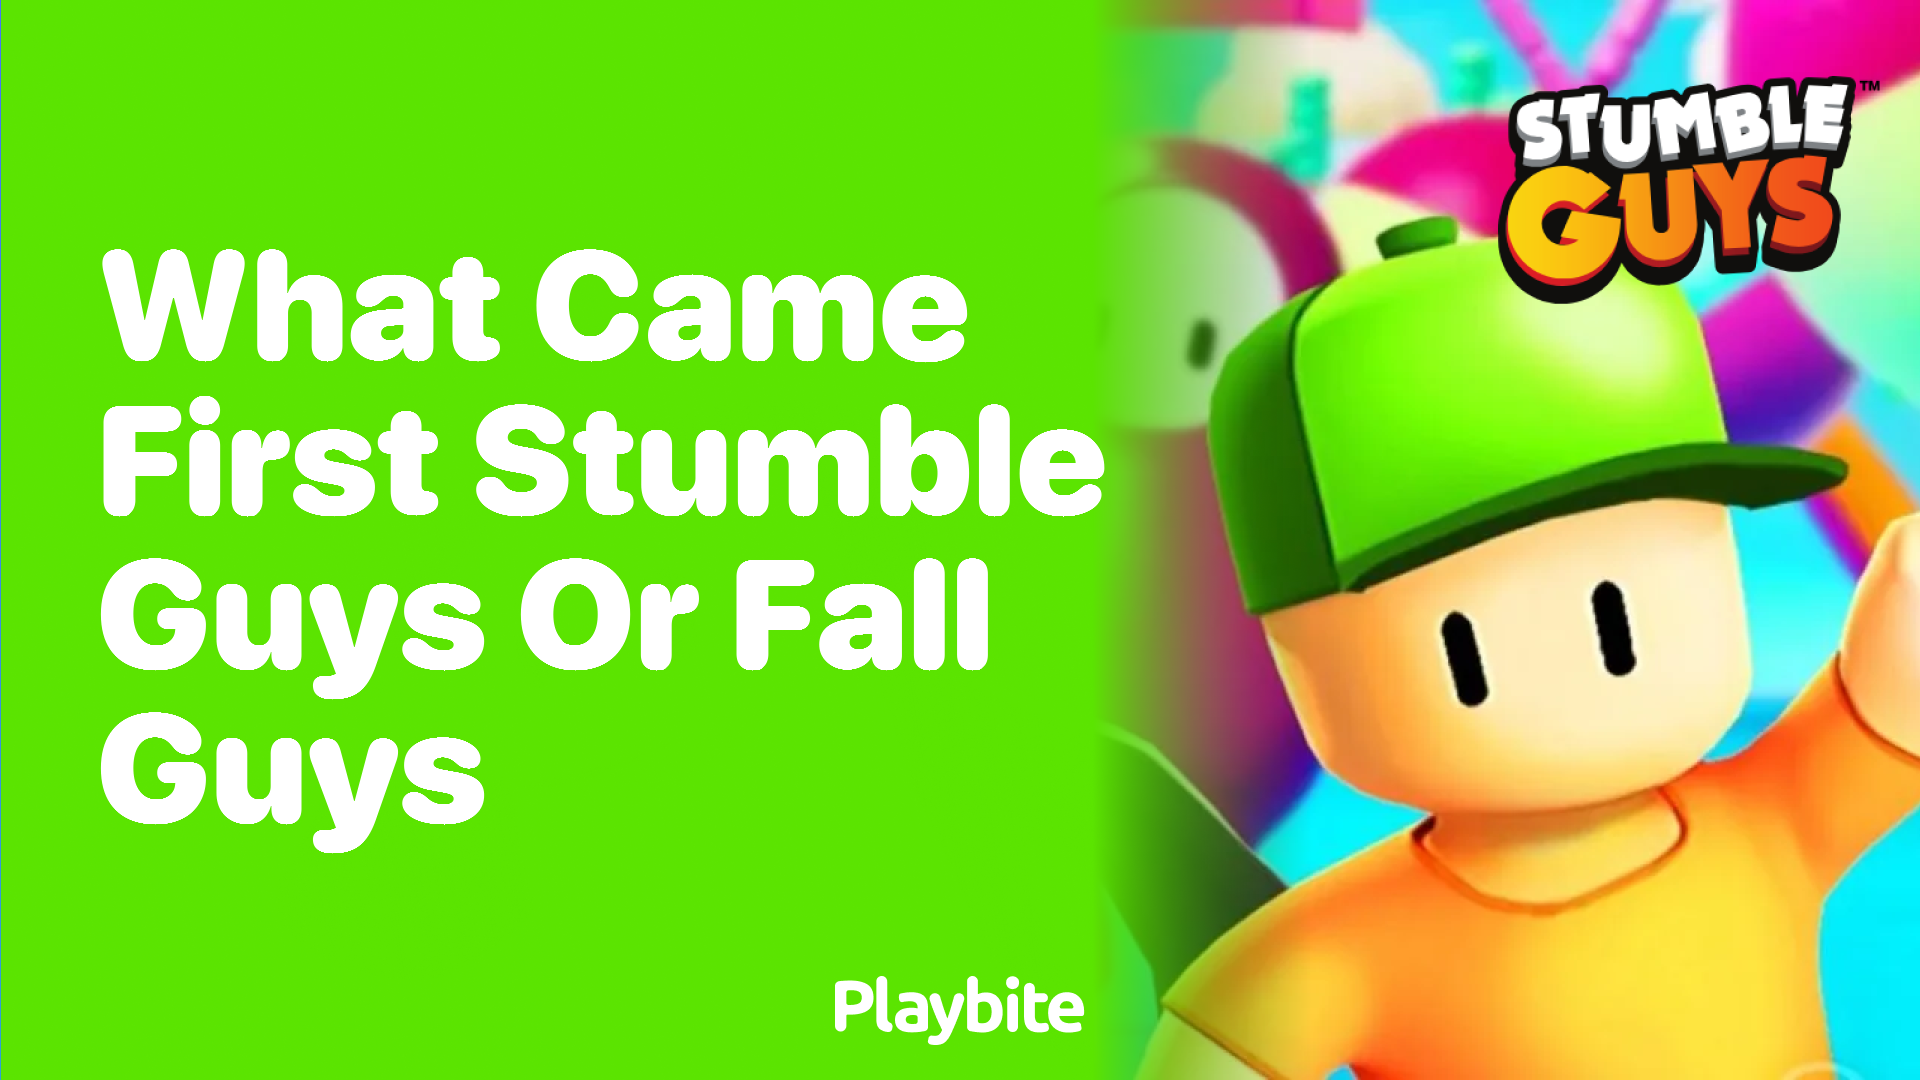 What Came First, Stumble Guys or Fall Guys?